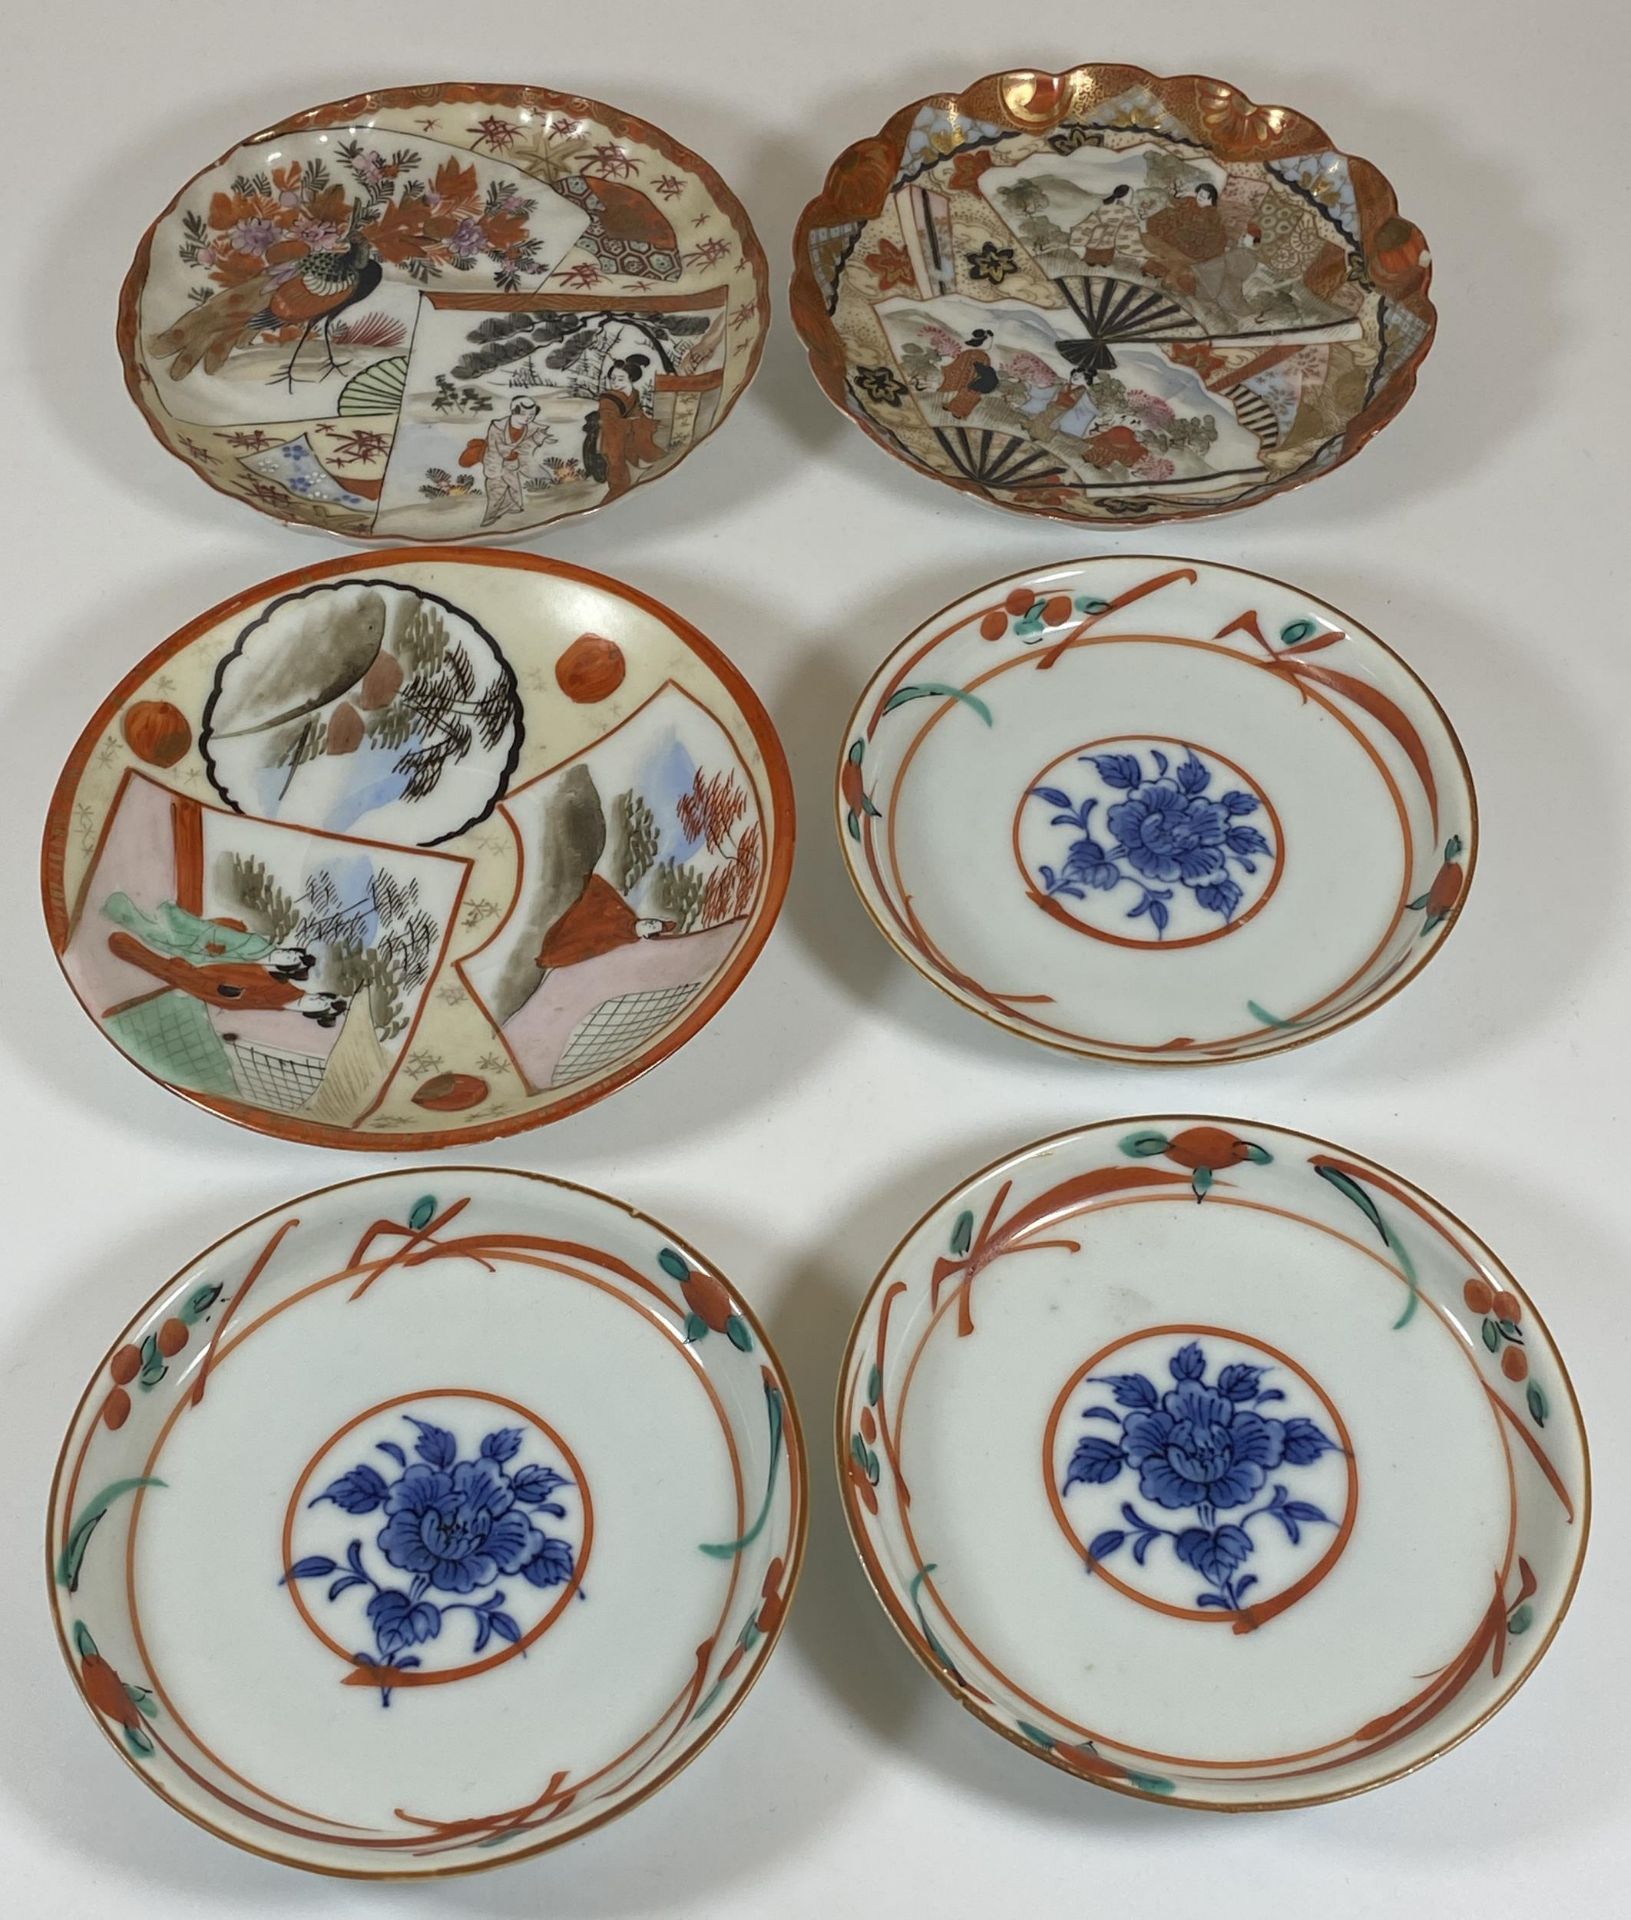 SIX JAPANESE PORCELAIN DISHES - SET OF THREE FLORAL EXAMPLES AND THREE KUTANI EXAMPLES, LARGEST